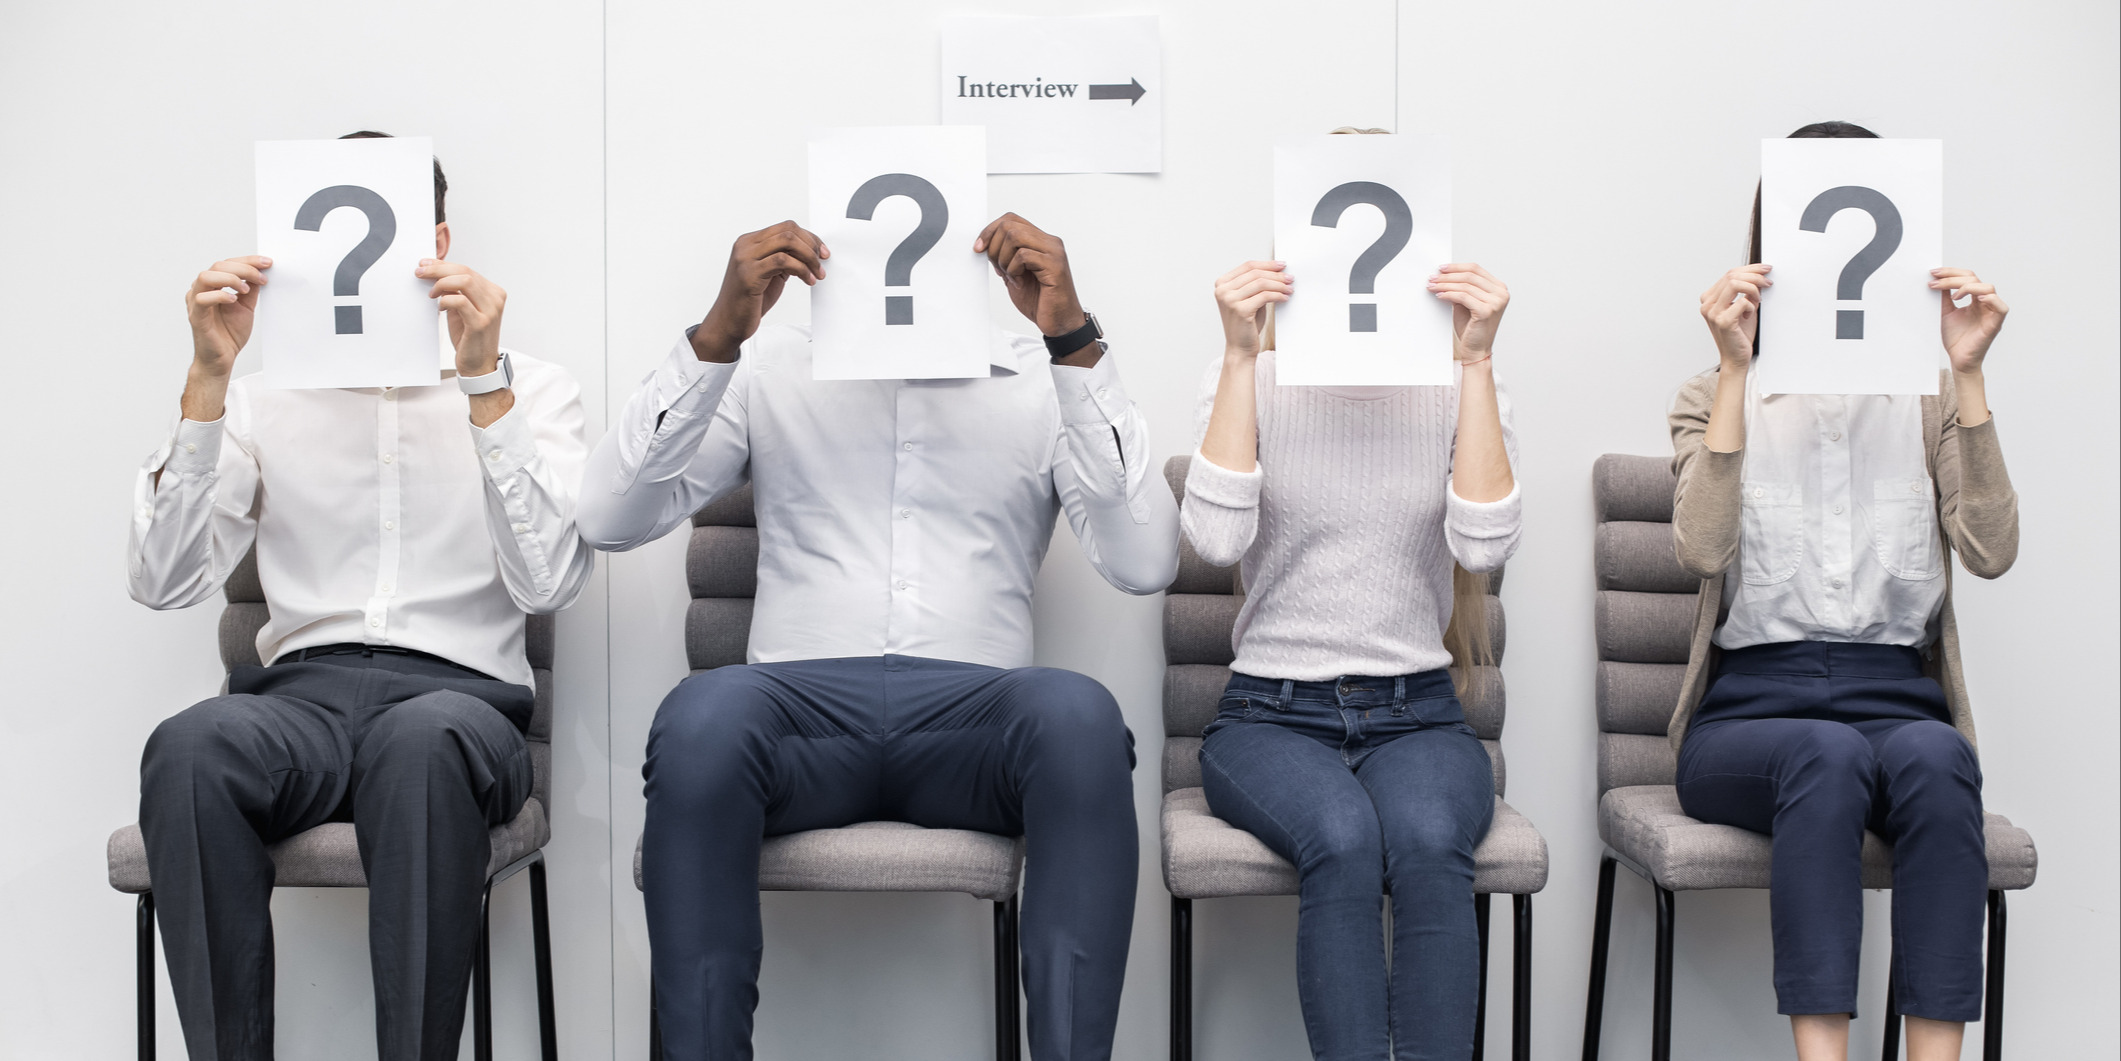 Understanding Talent and Fit with Better Interview Questions